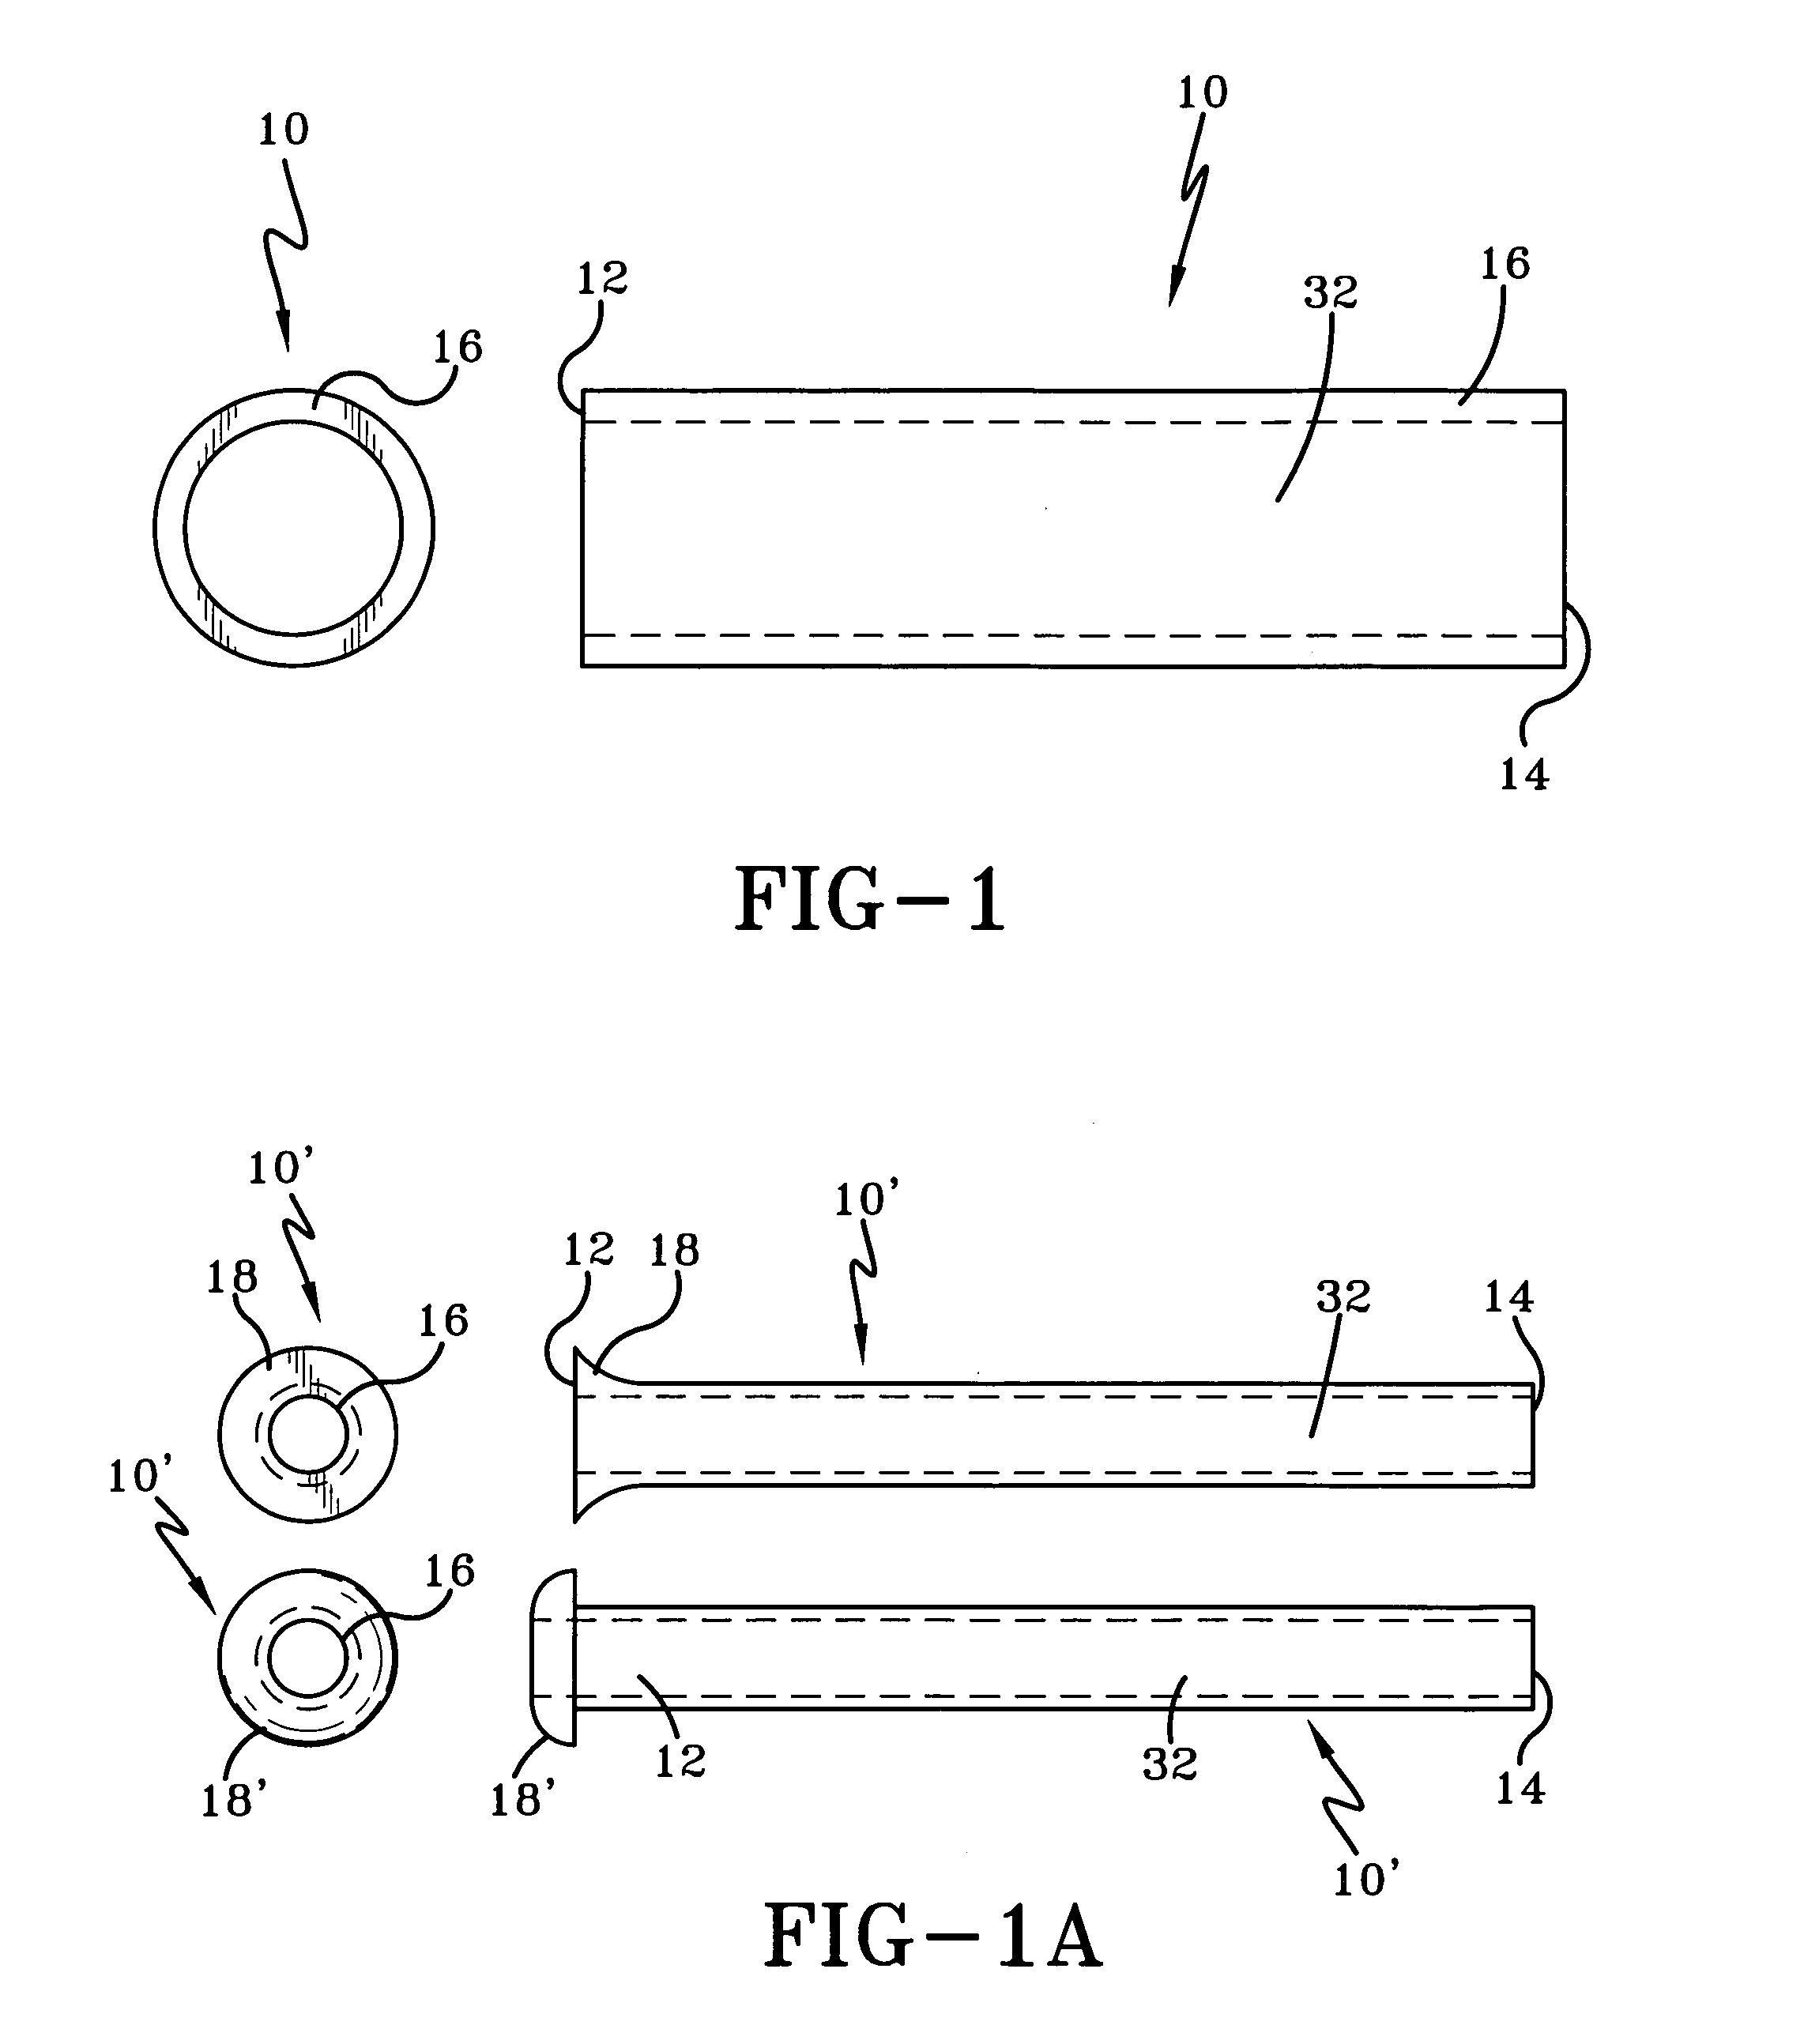 Apparatus and method for non-pharmacological treatment of glaucoma and lowering intraocular pressure